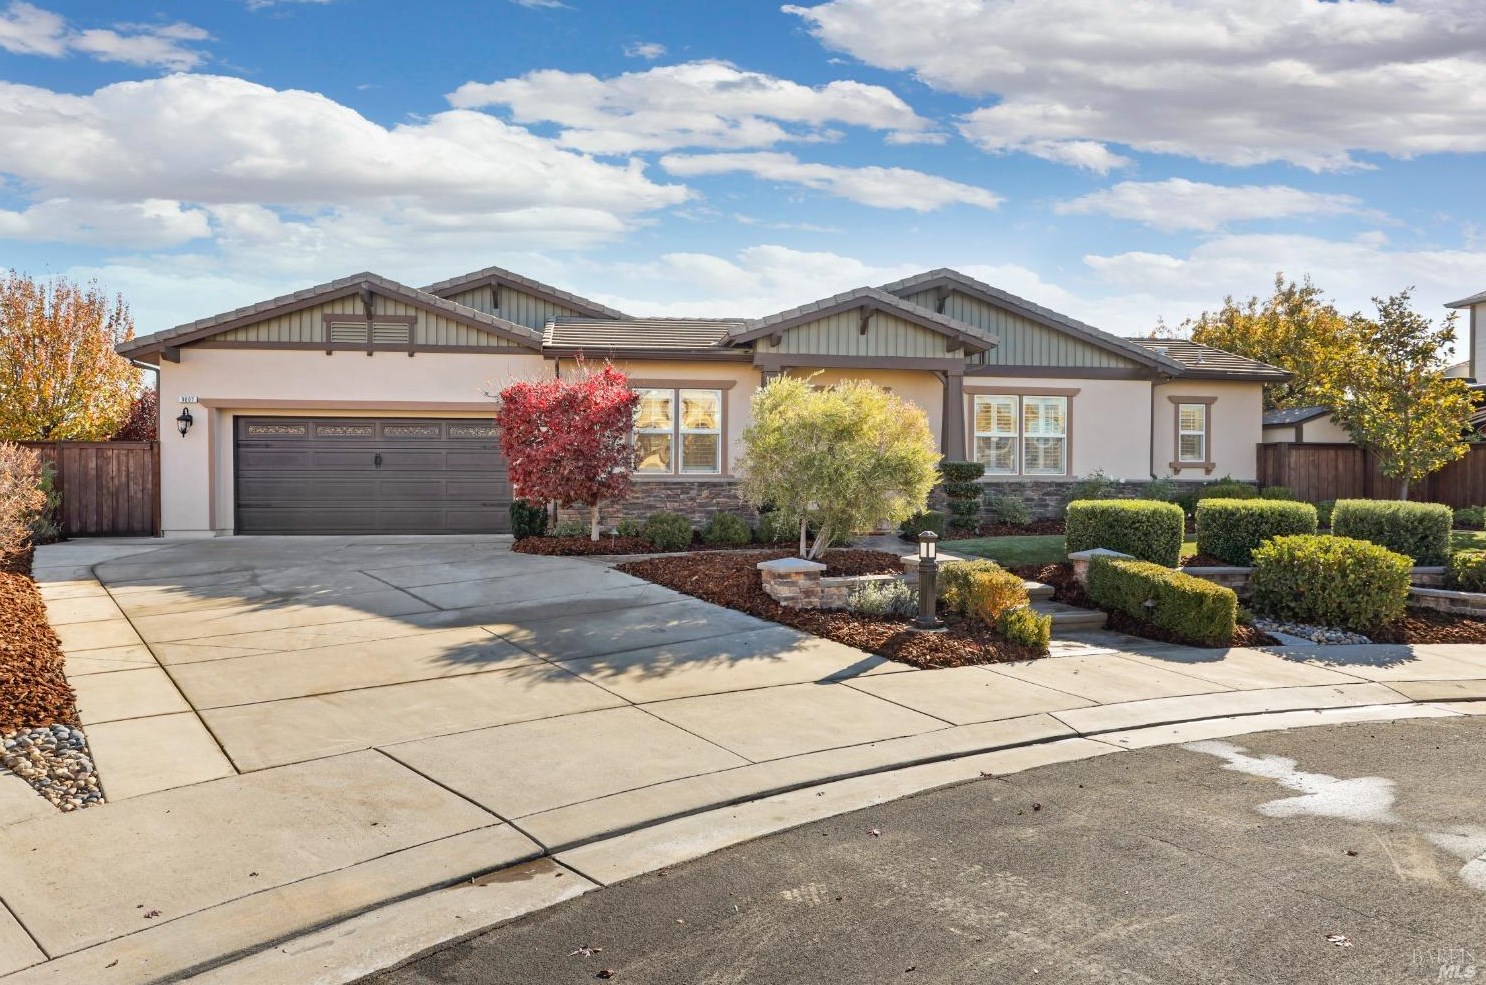 3007 Eagles Nest Ct, Vacaville, CA 95688